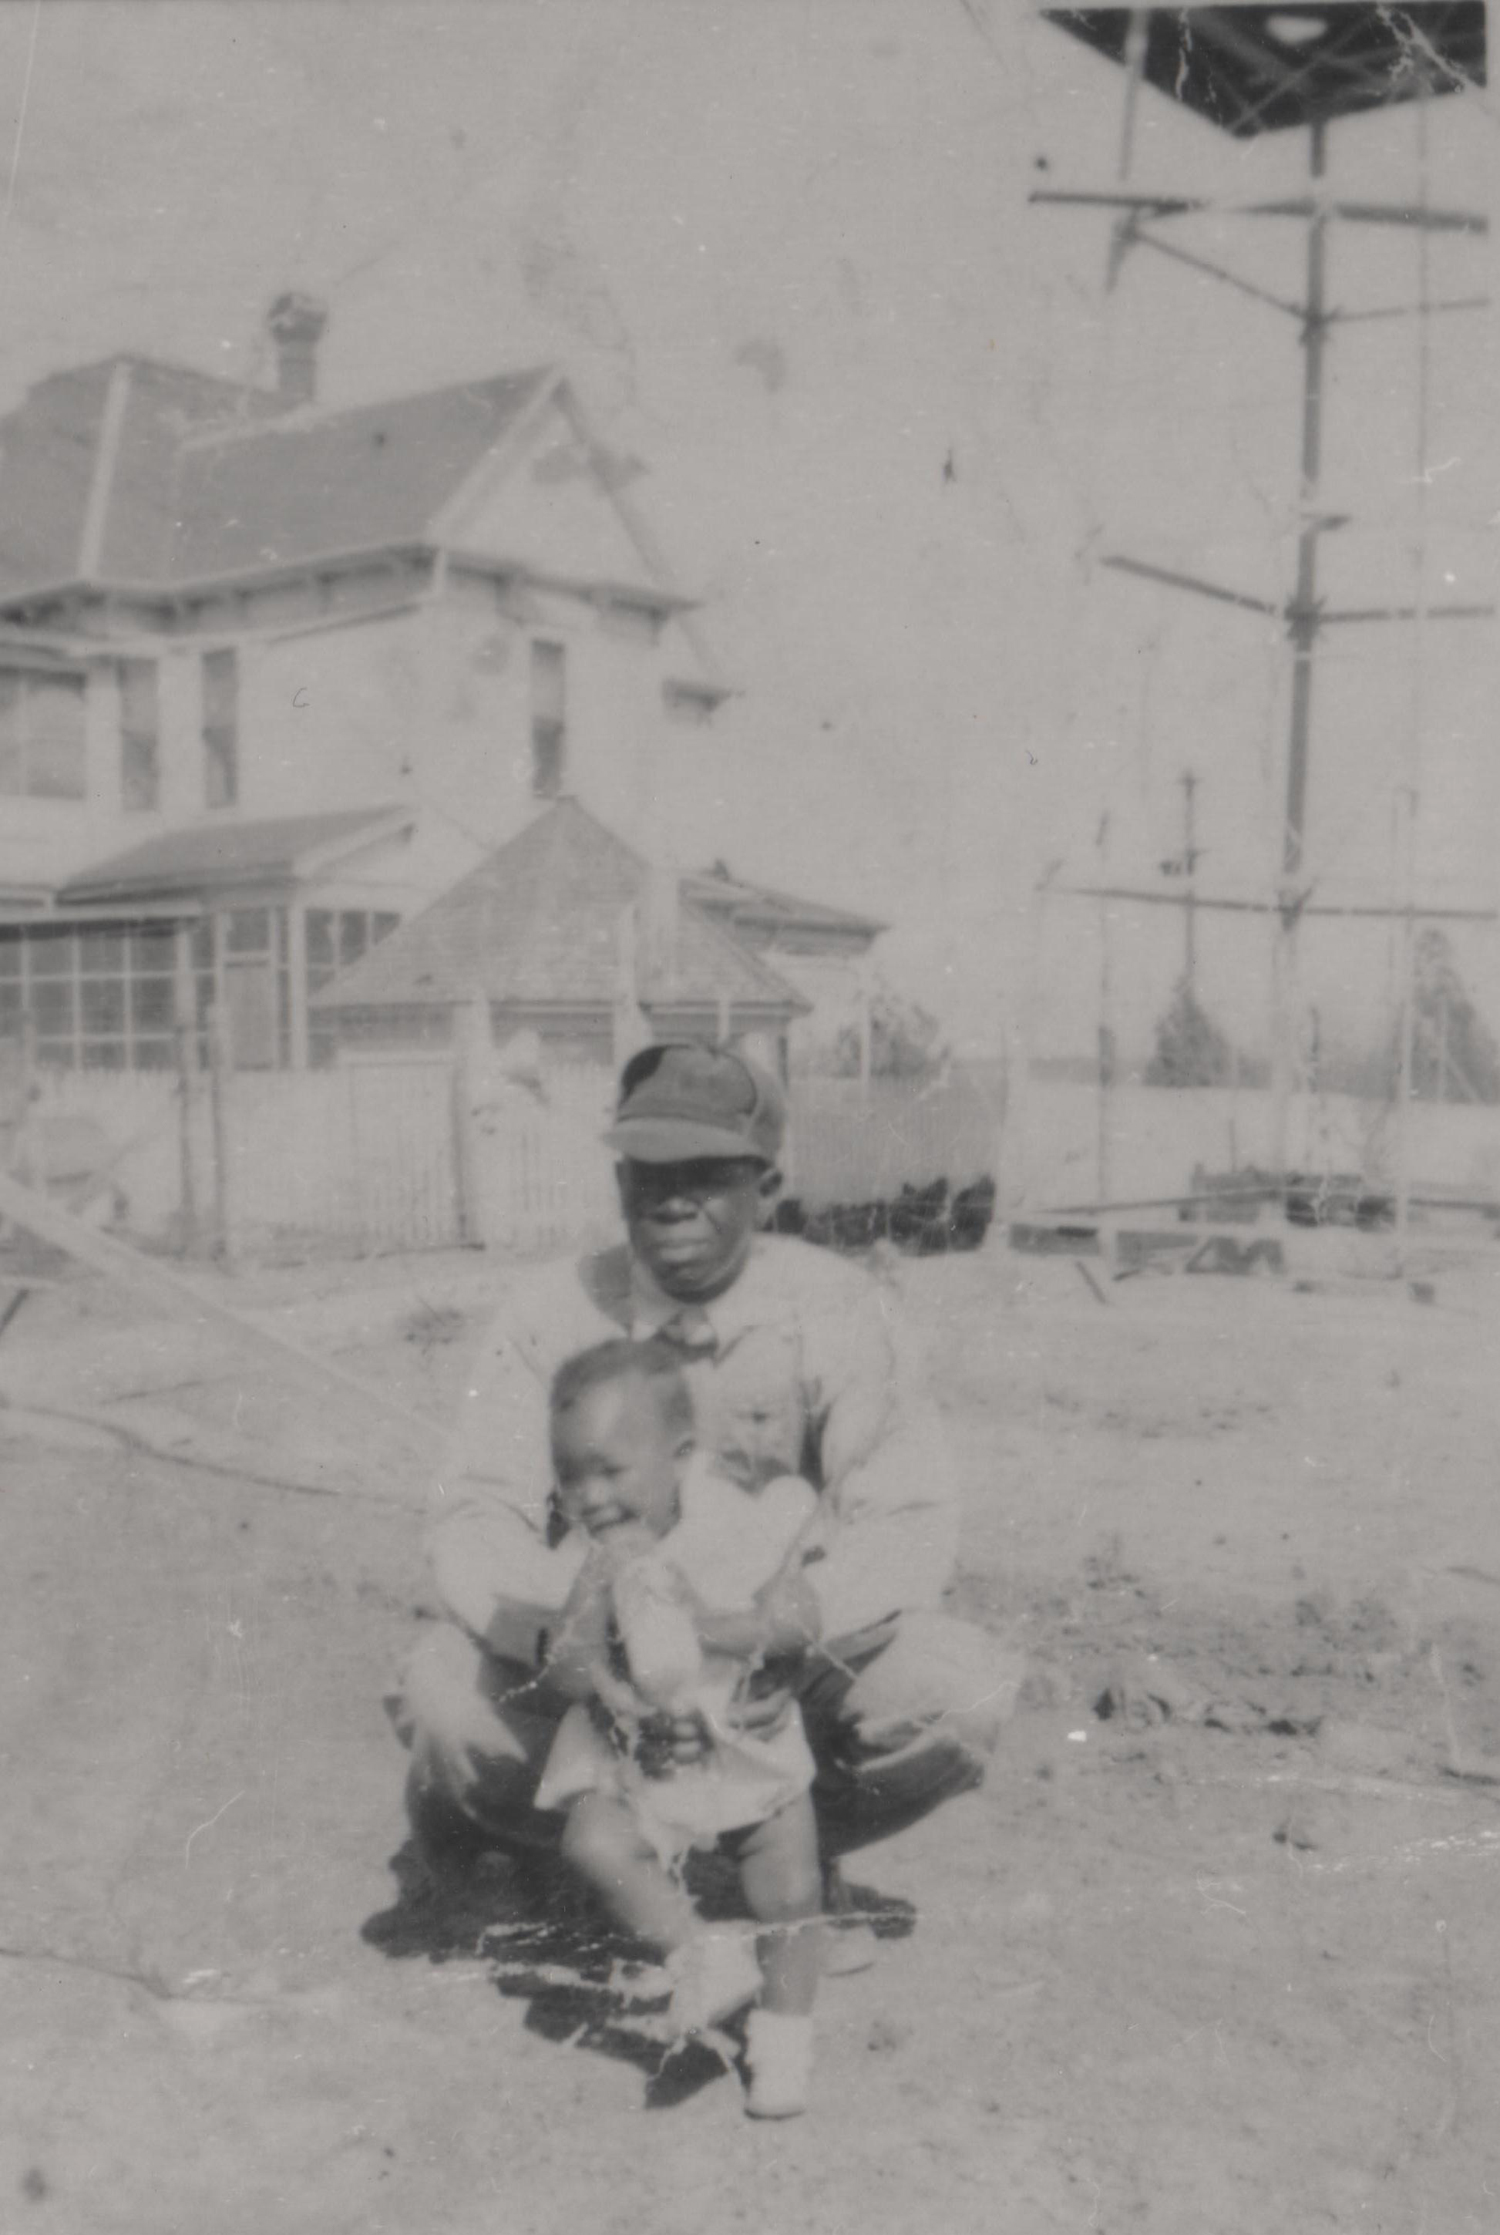 The Farrell-Wilson house behind caretaker Ernest Sanders and his daughter Ammie (named after Ammie Wilson), circa 1940